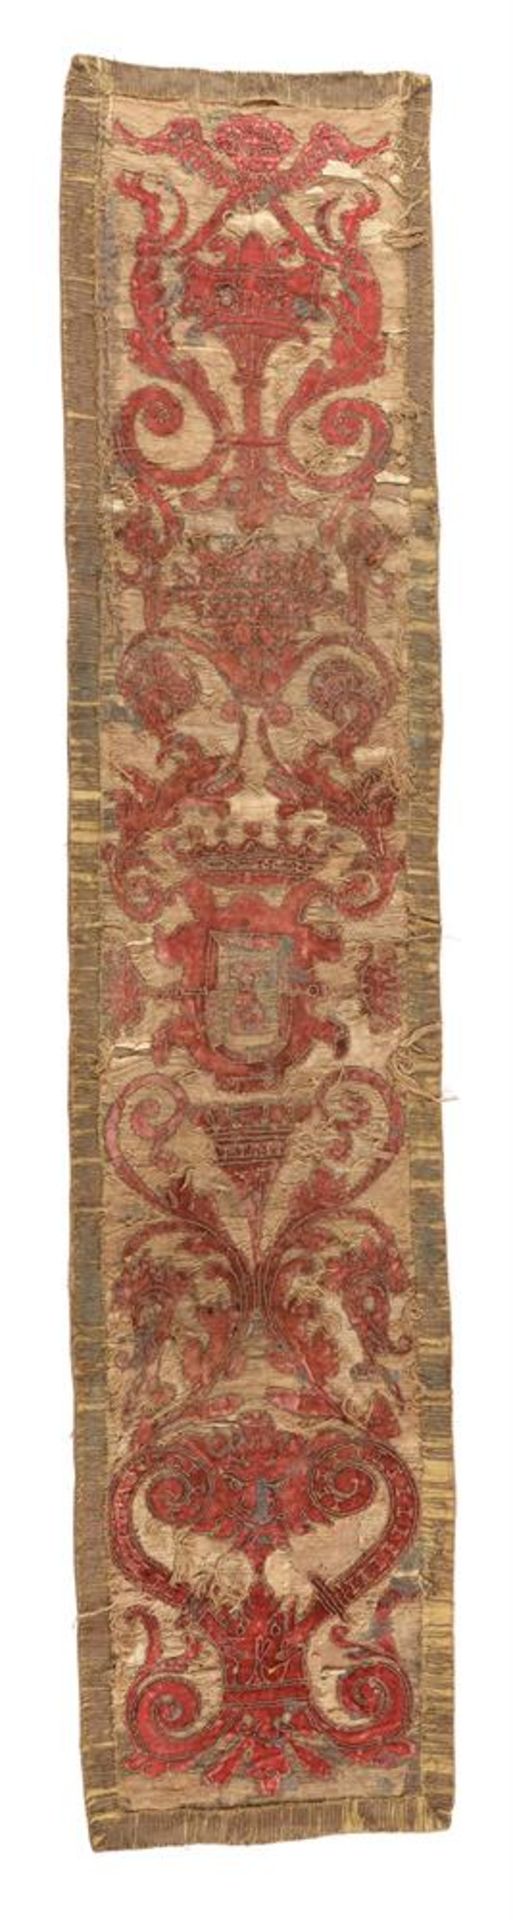 TEXTILES TO INCLUDE EARLY ORPHREY FRAGMENTS, LATE 16TH CENTURY AND LATER - Bild 5 aus 8